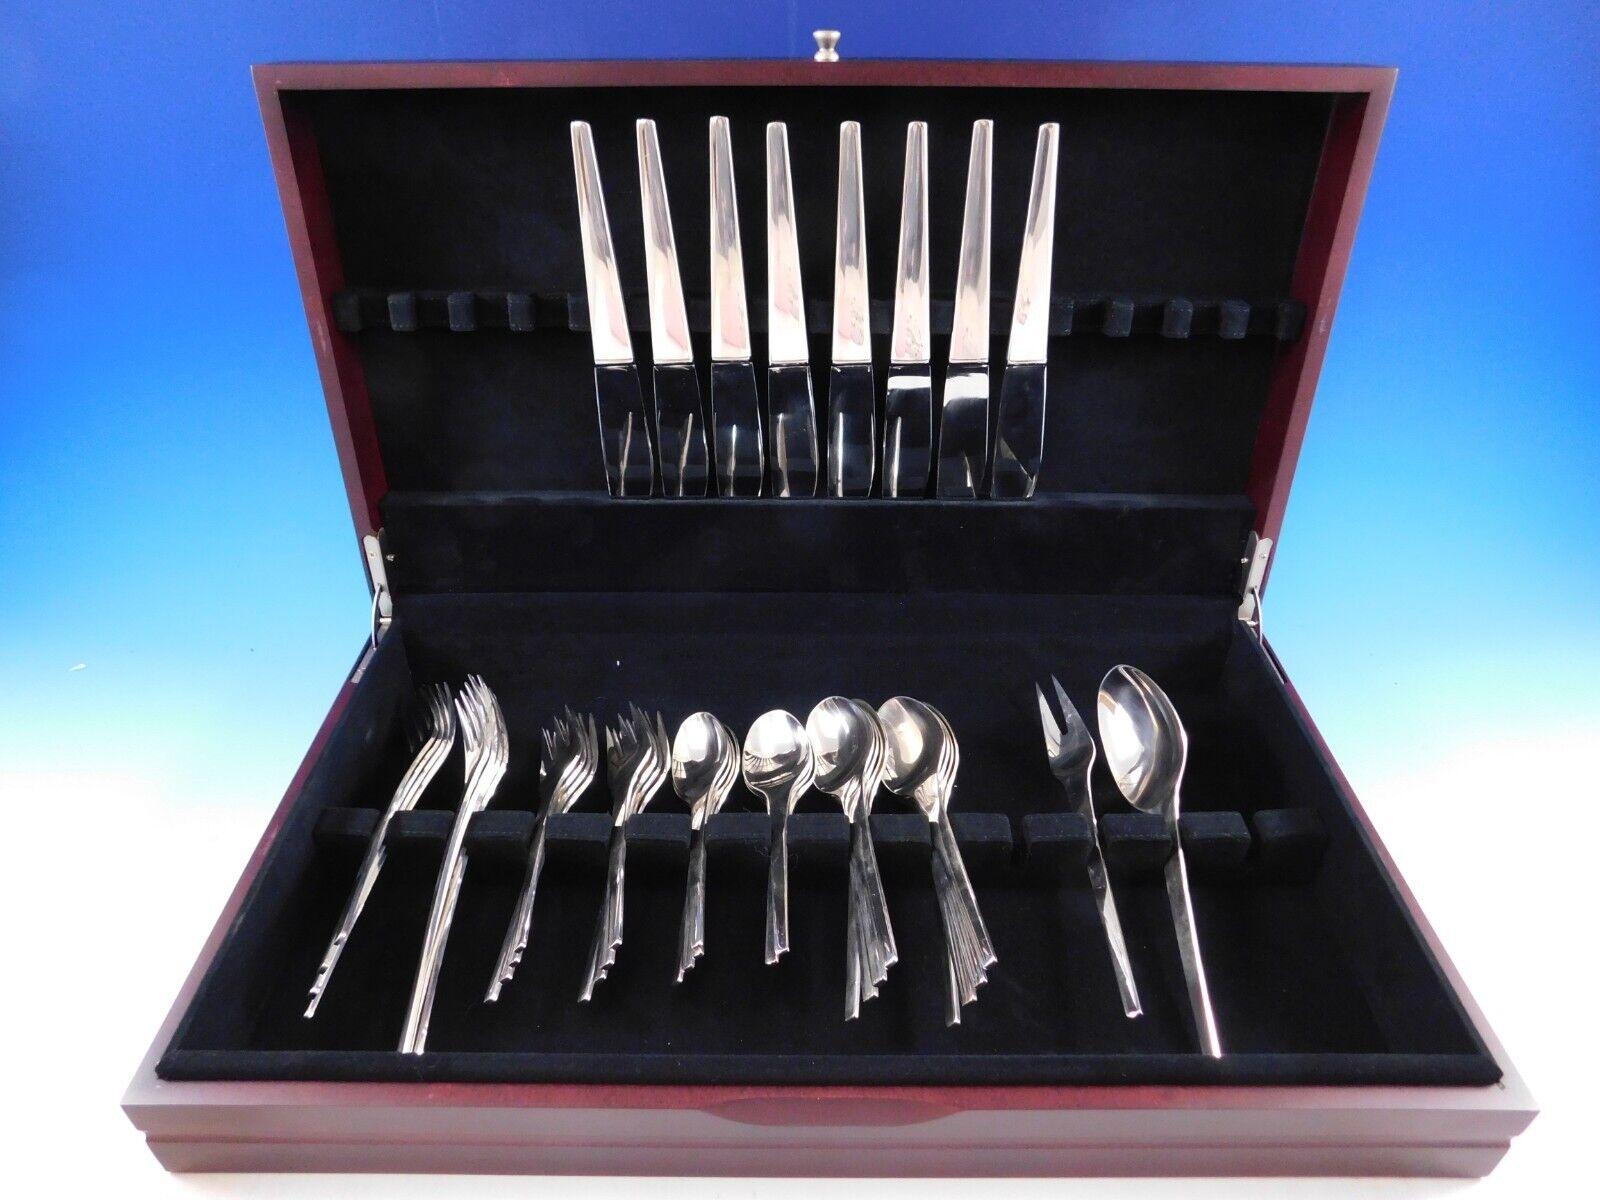 The Caravel cutlery pattern has won numerous awards including the prestigious Der goldene Leffel (1963) where the jury praised Caravel for its brilliant functionalist expression, style and understanding of silver. The Caravel pattern is signature